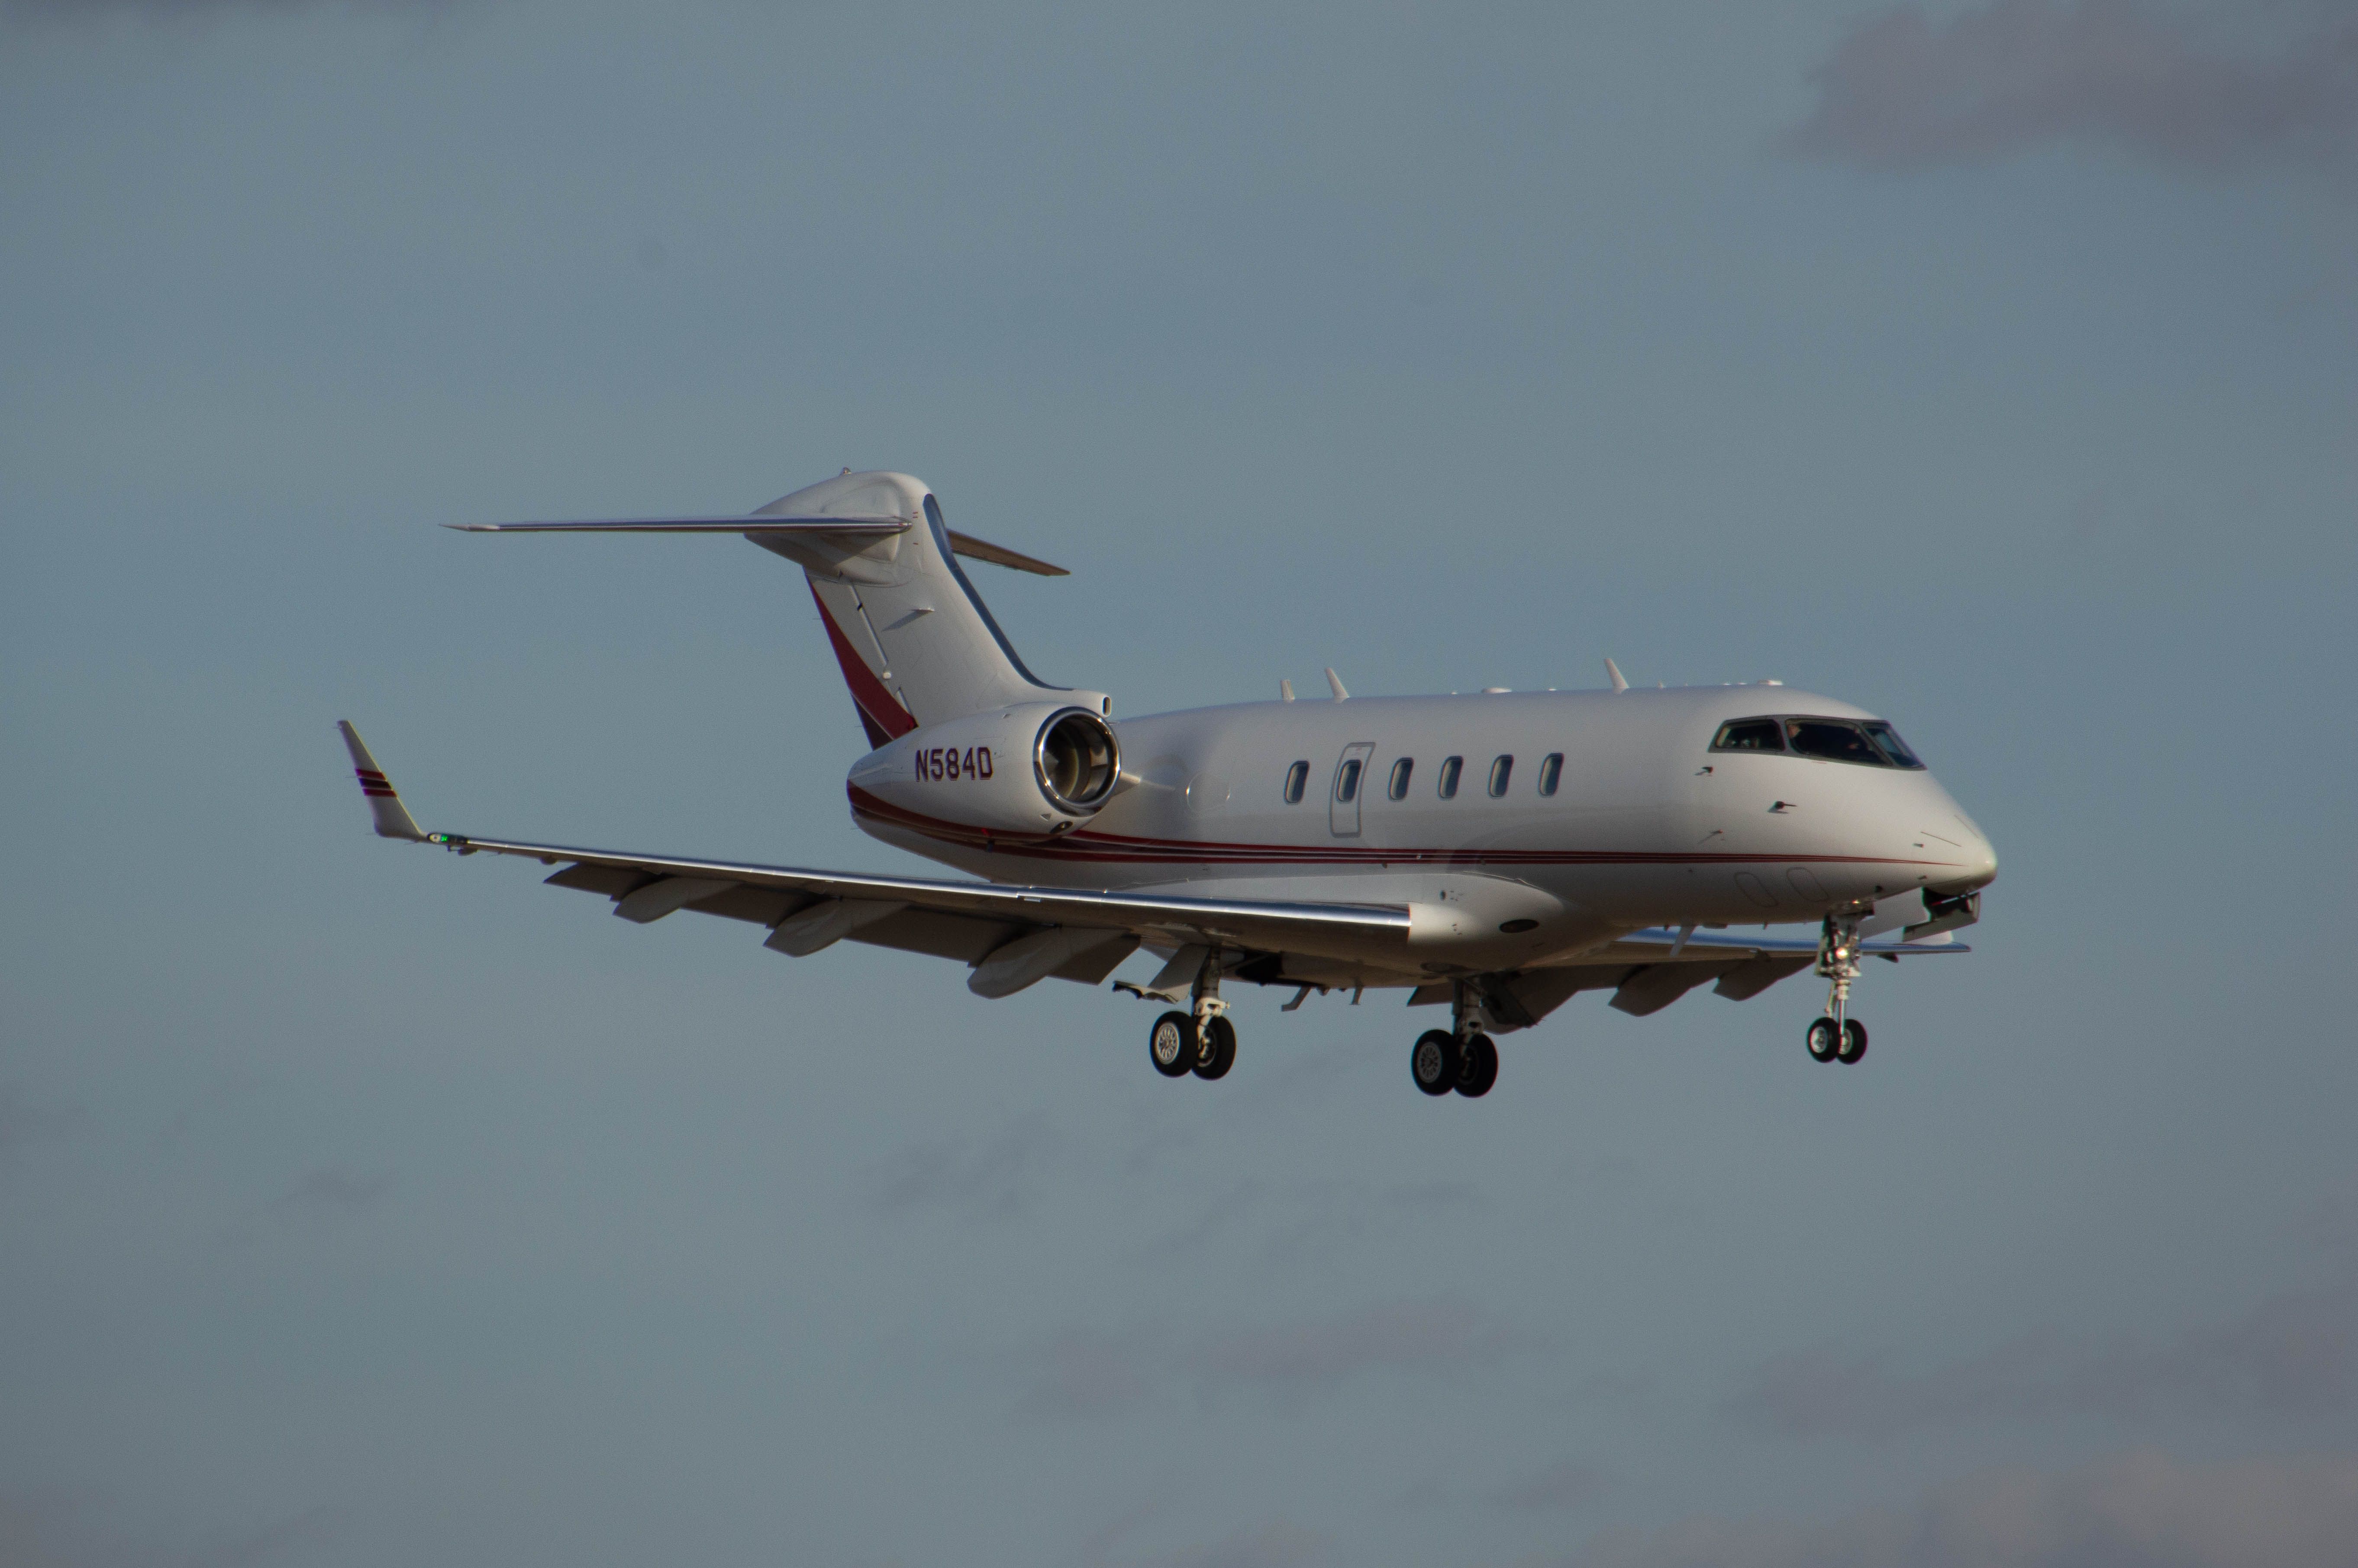 N584D — - N584D is on short final Runway 23 at DSM. This aircraft, a 2008 Challenger 300, is owned by Bank Of Utah Trustee (Salt Lake City, UT) and not available for tracking. Photo taken March 4, 2020 at 4:24 PM with Nikon D3200 at 400mm.